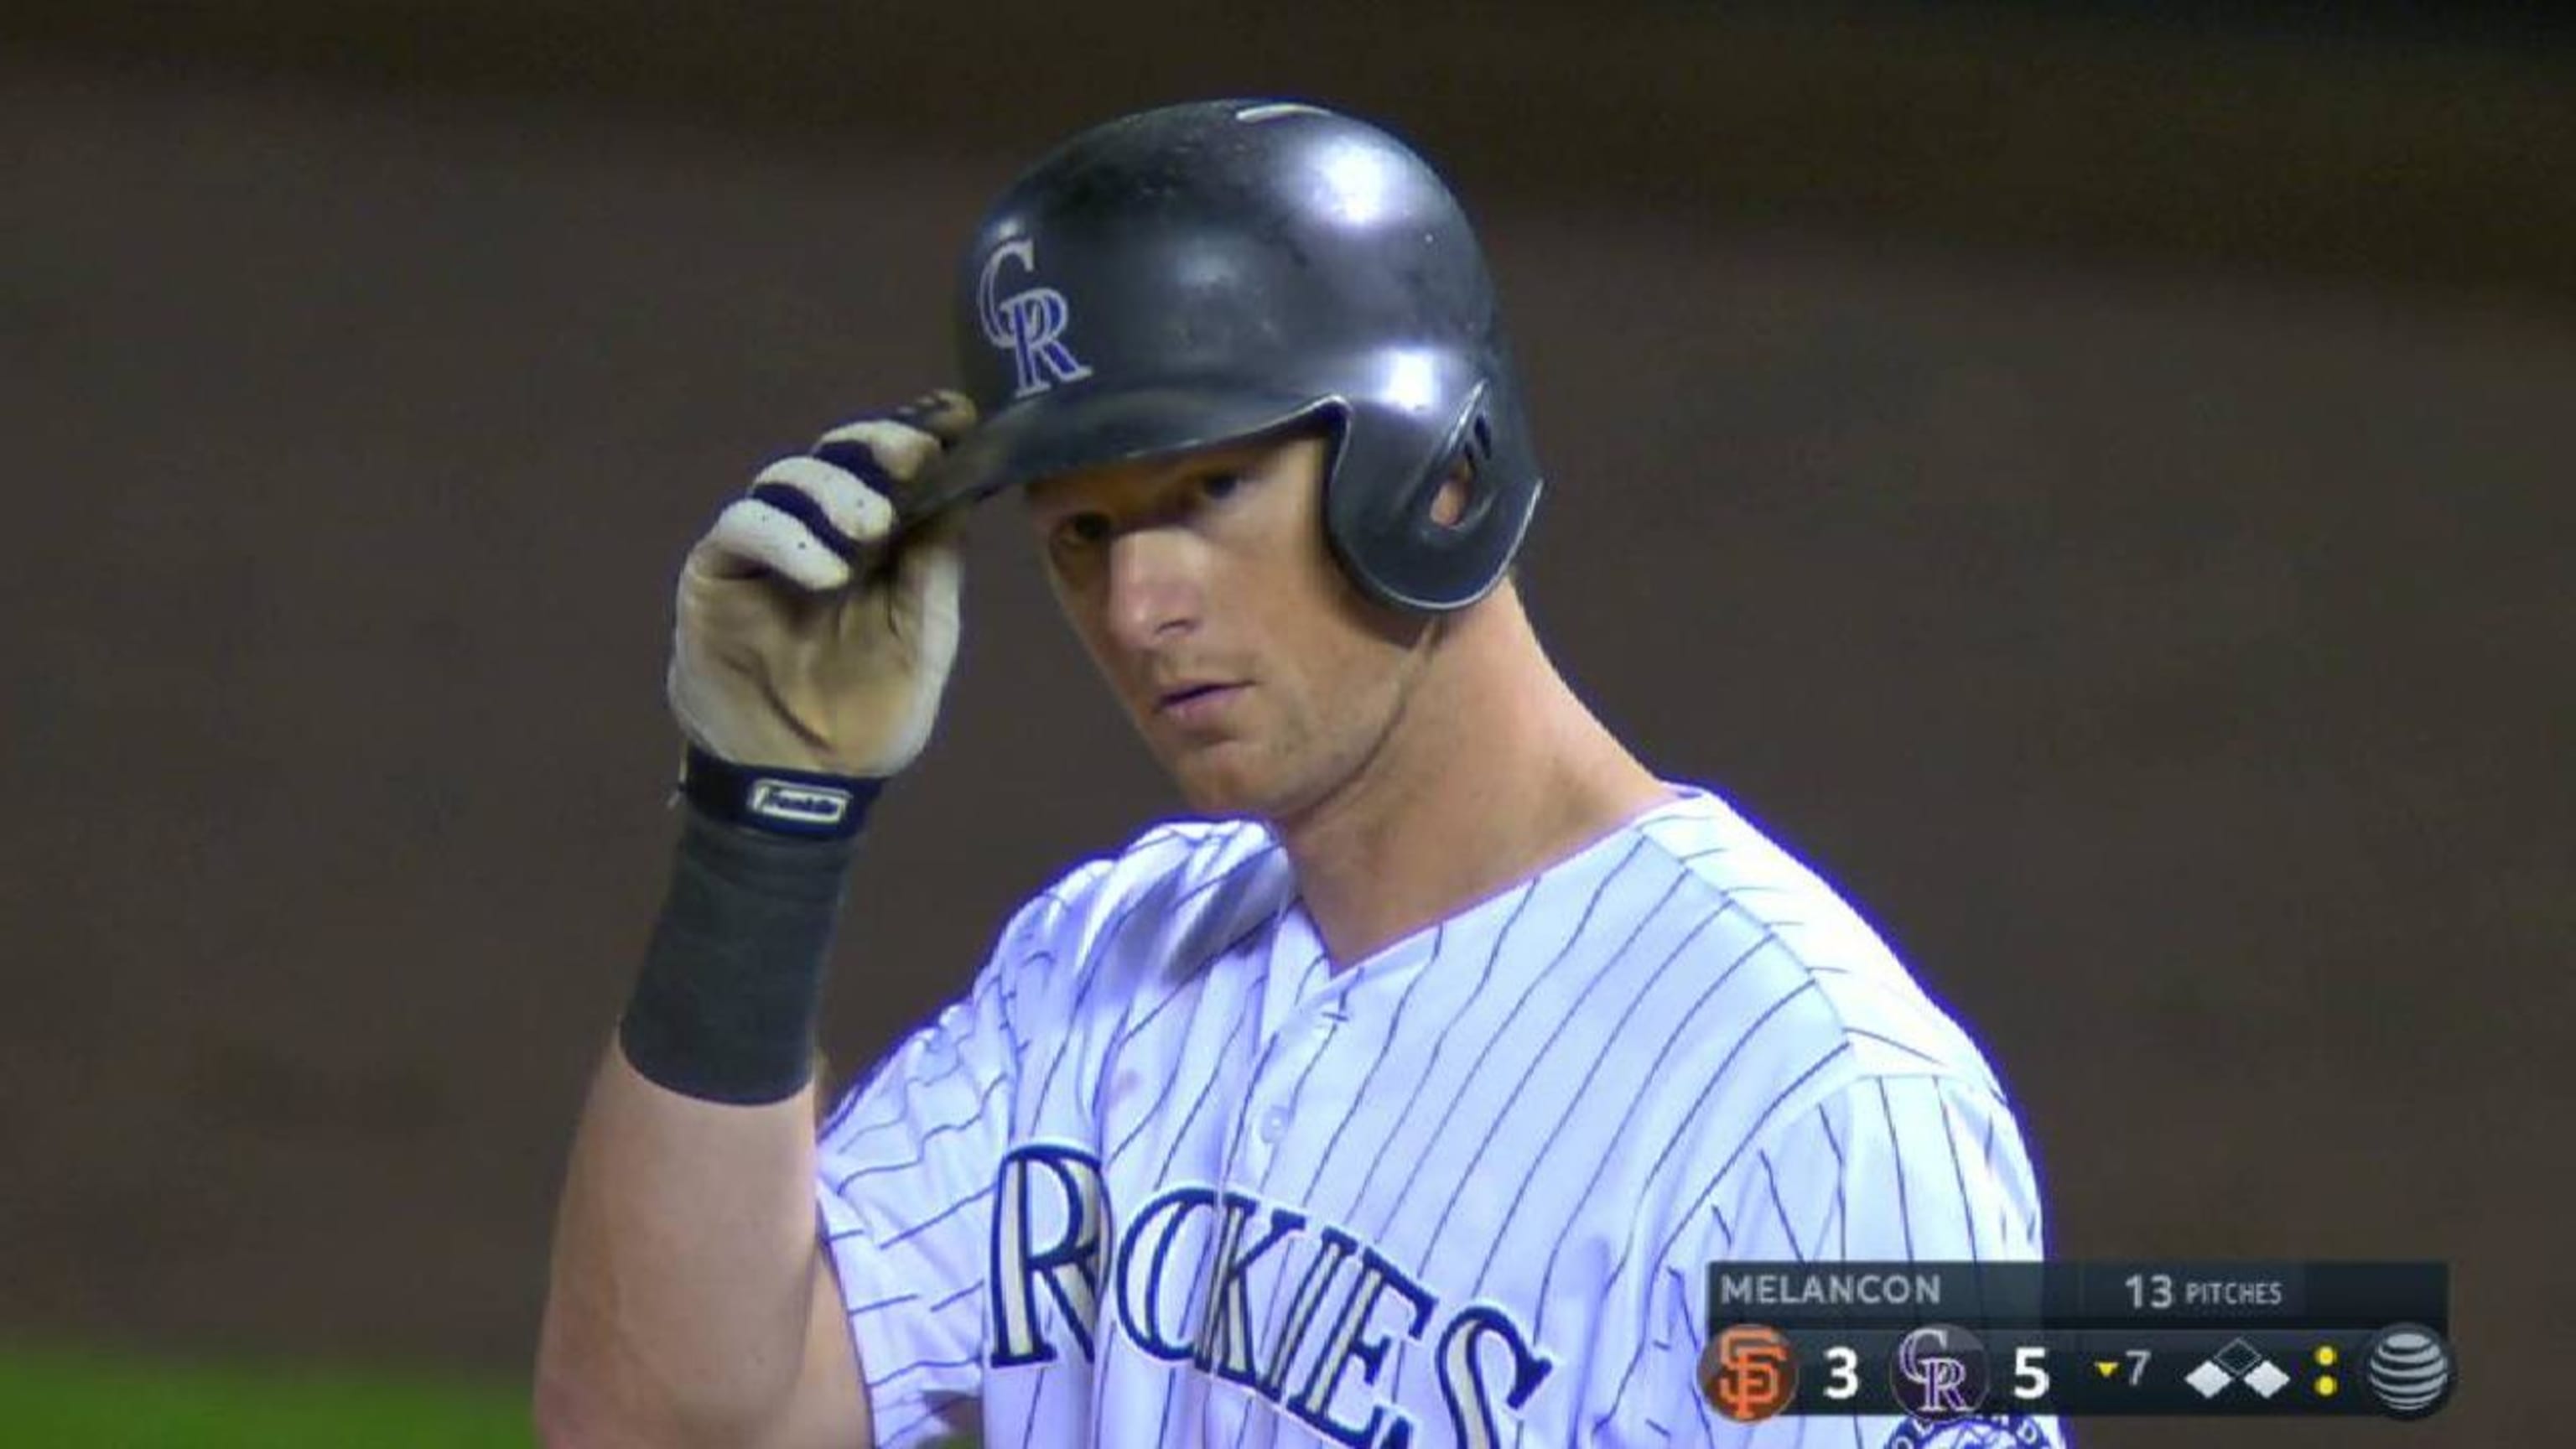 Story hits 3-run homer in 7th, Rockies hold off Cards 3-2 – Daily